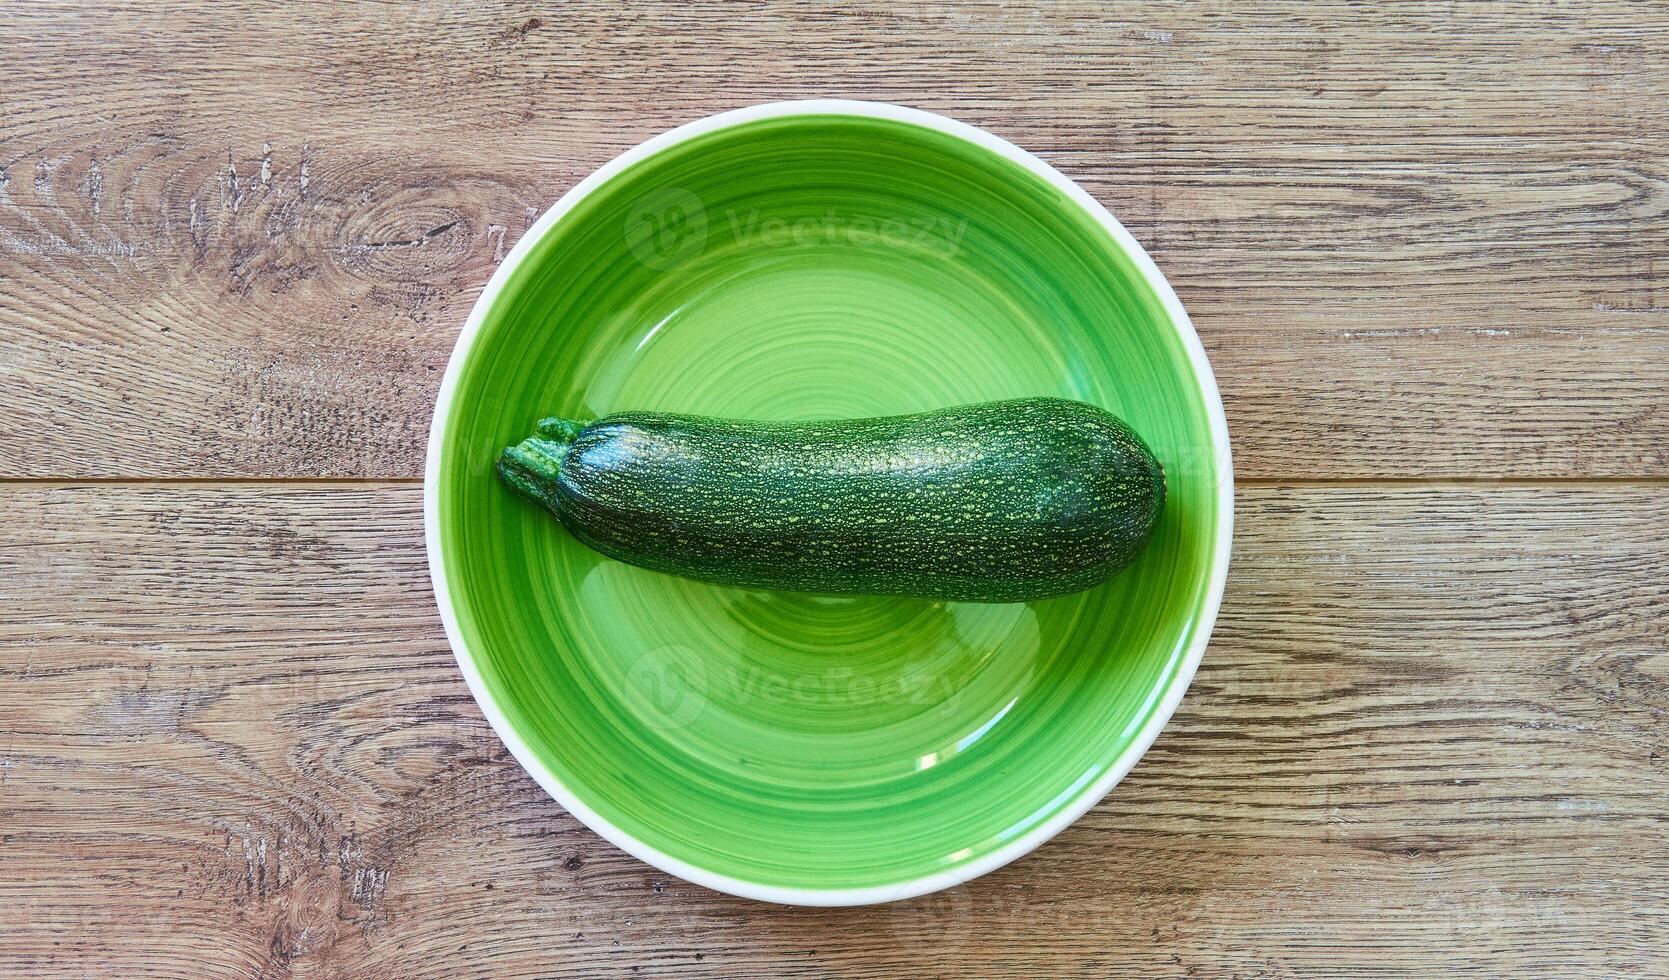 green zucchini squash with patterned skin on a green plate on a wooden tabletop photo